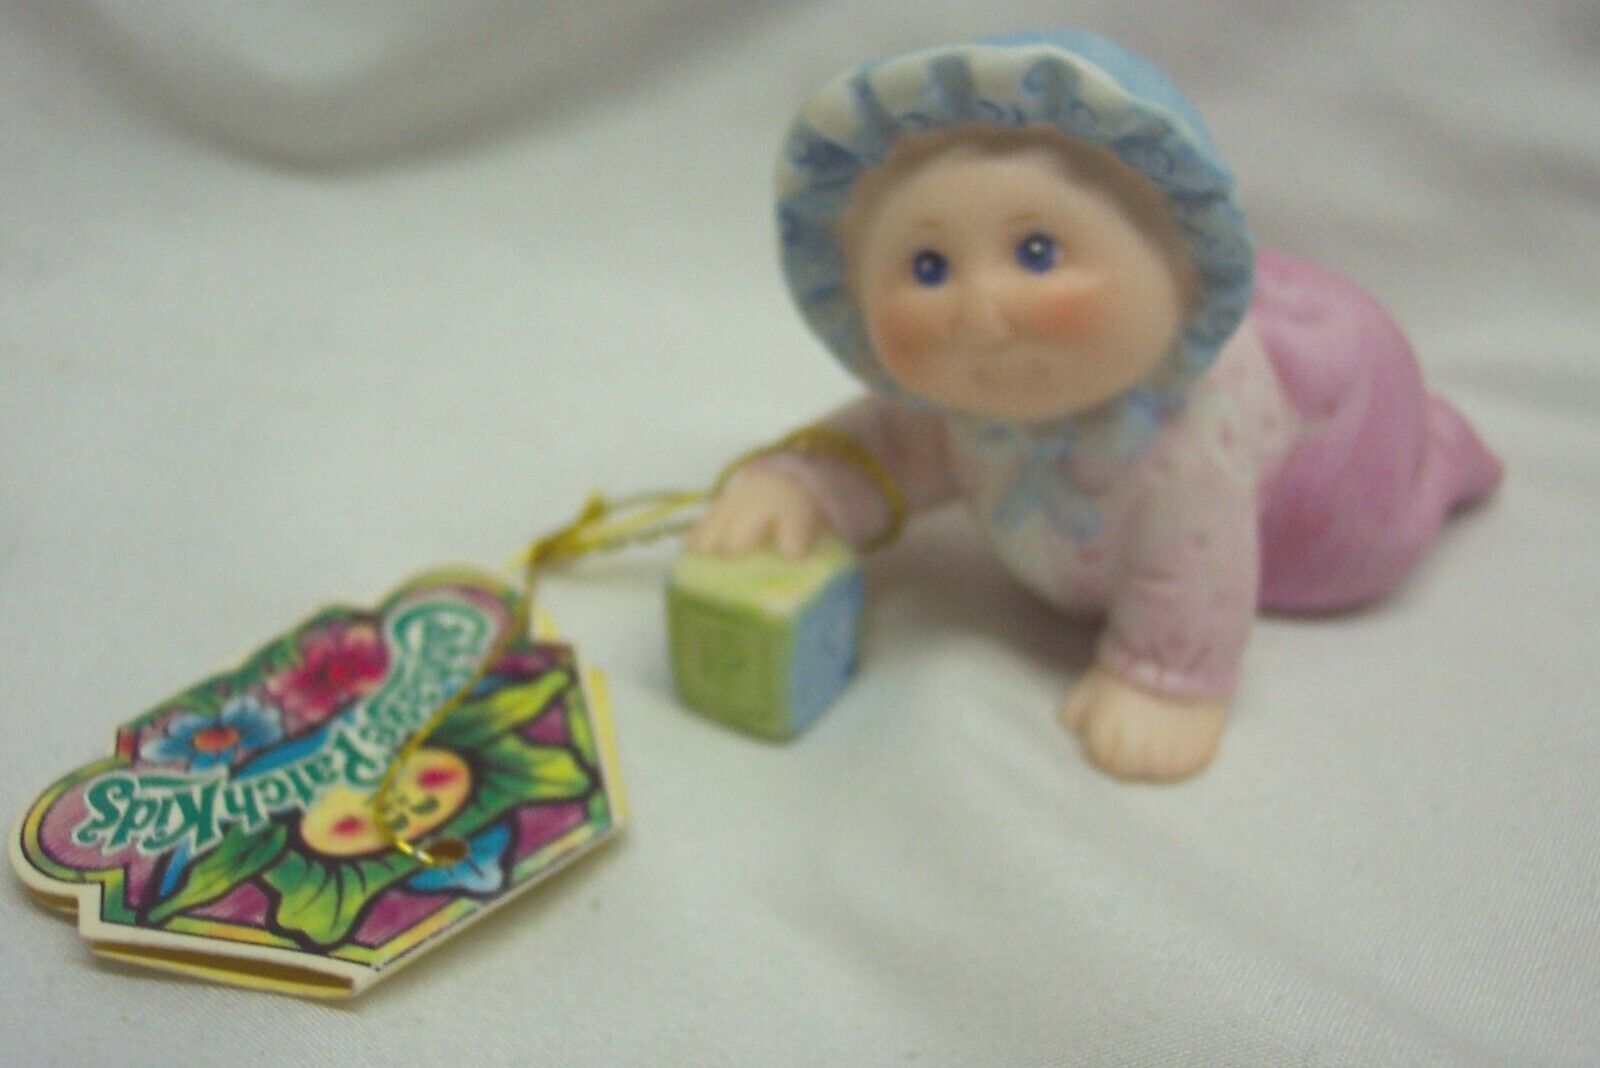 VINTAGE 1984 CABBAGE PATCH KIDS BABY GIRL 3" CERAMIC FIGURINE 1980's NEW - $18.32